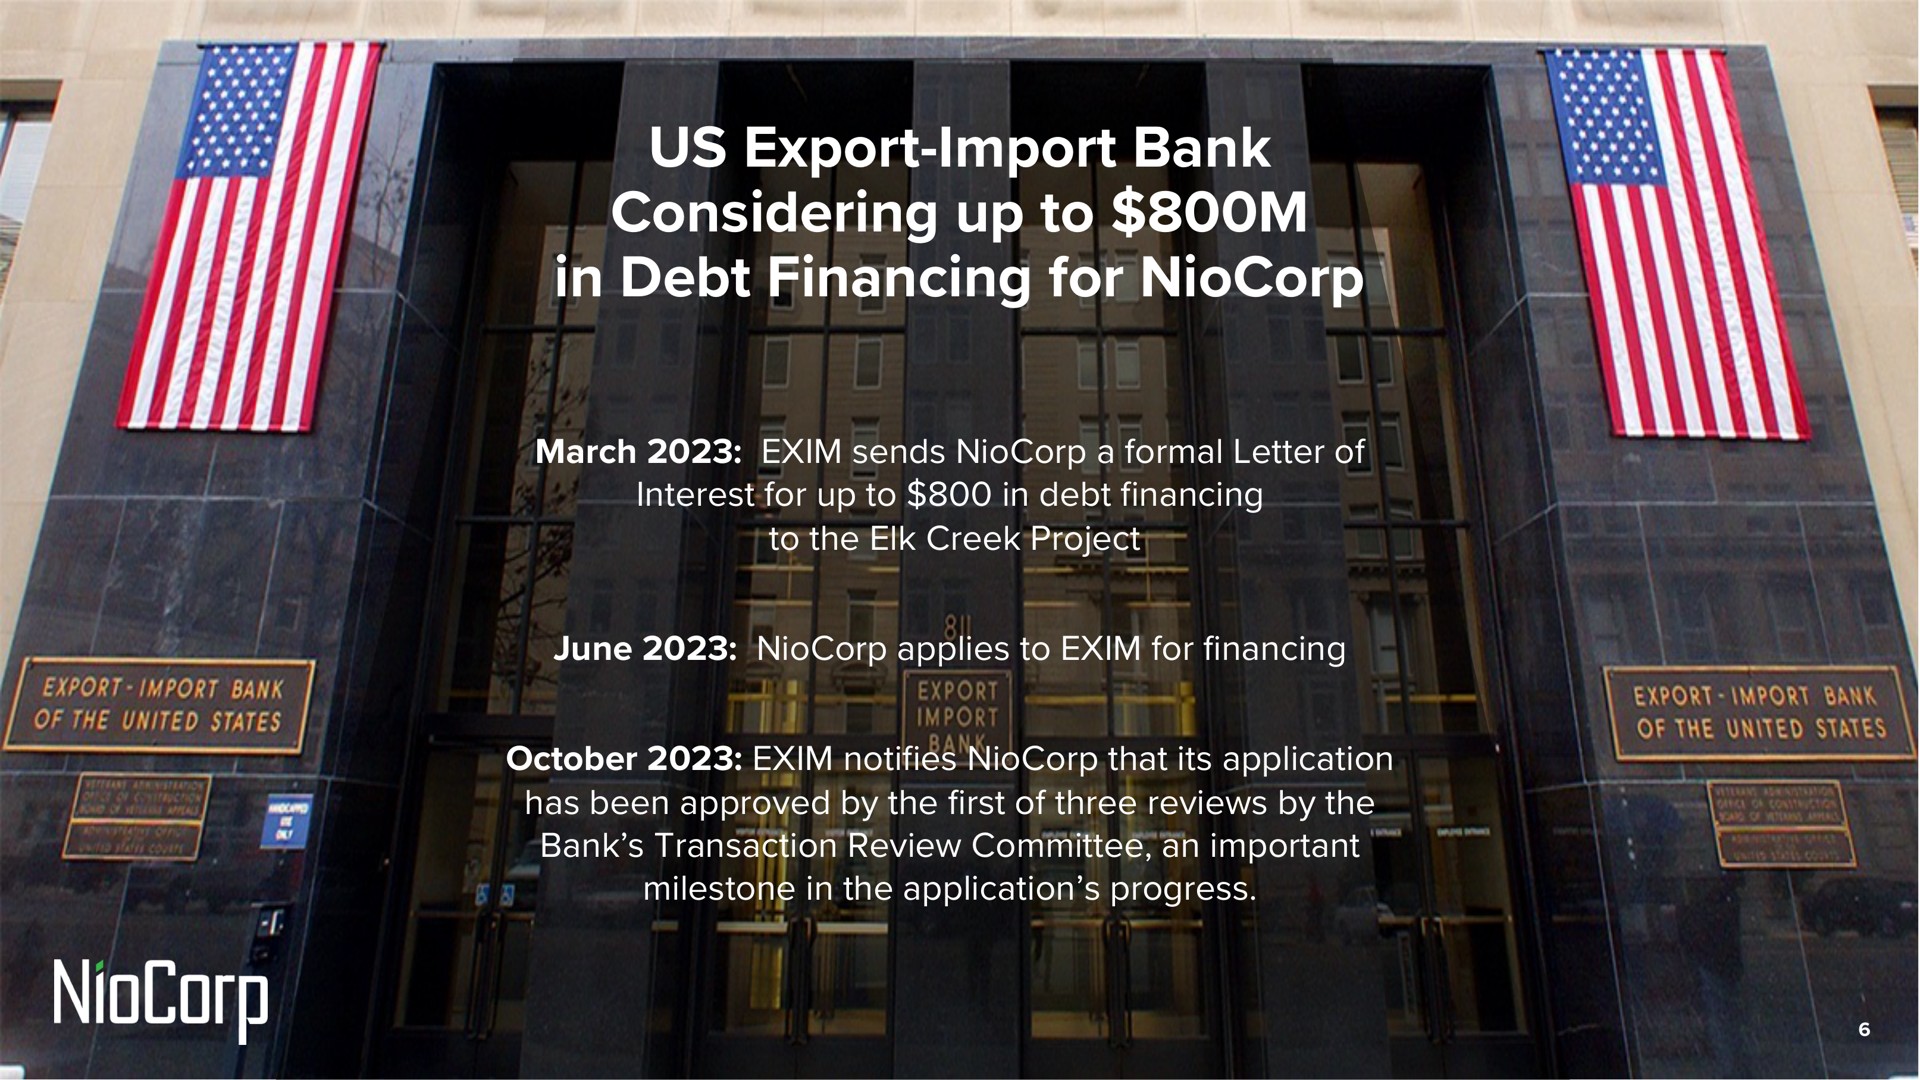 us export import bank considering up to in debt financing for march sends a formal letter of interest for up to in debt financing to the elk creek project june applies to for financing notifies that its application has been approved by the first of three reviews by the bank transaction review committee an important milestone in the application progress ula export import united states export import aes i | NioCorp